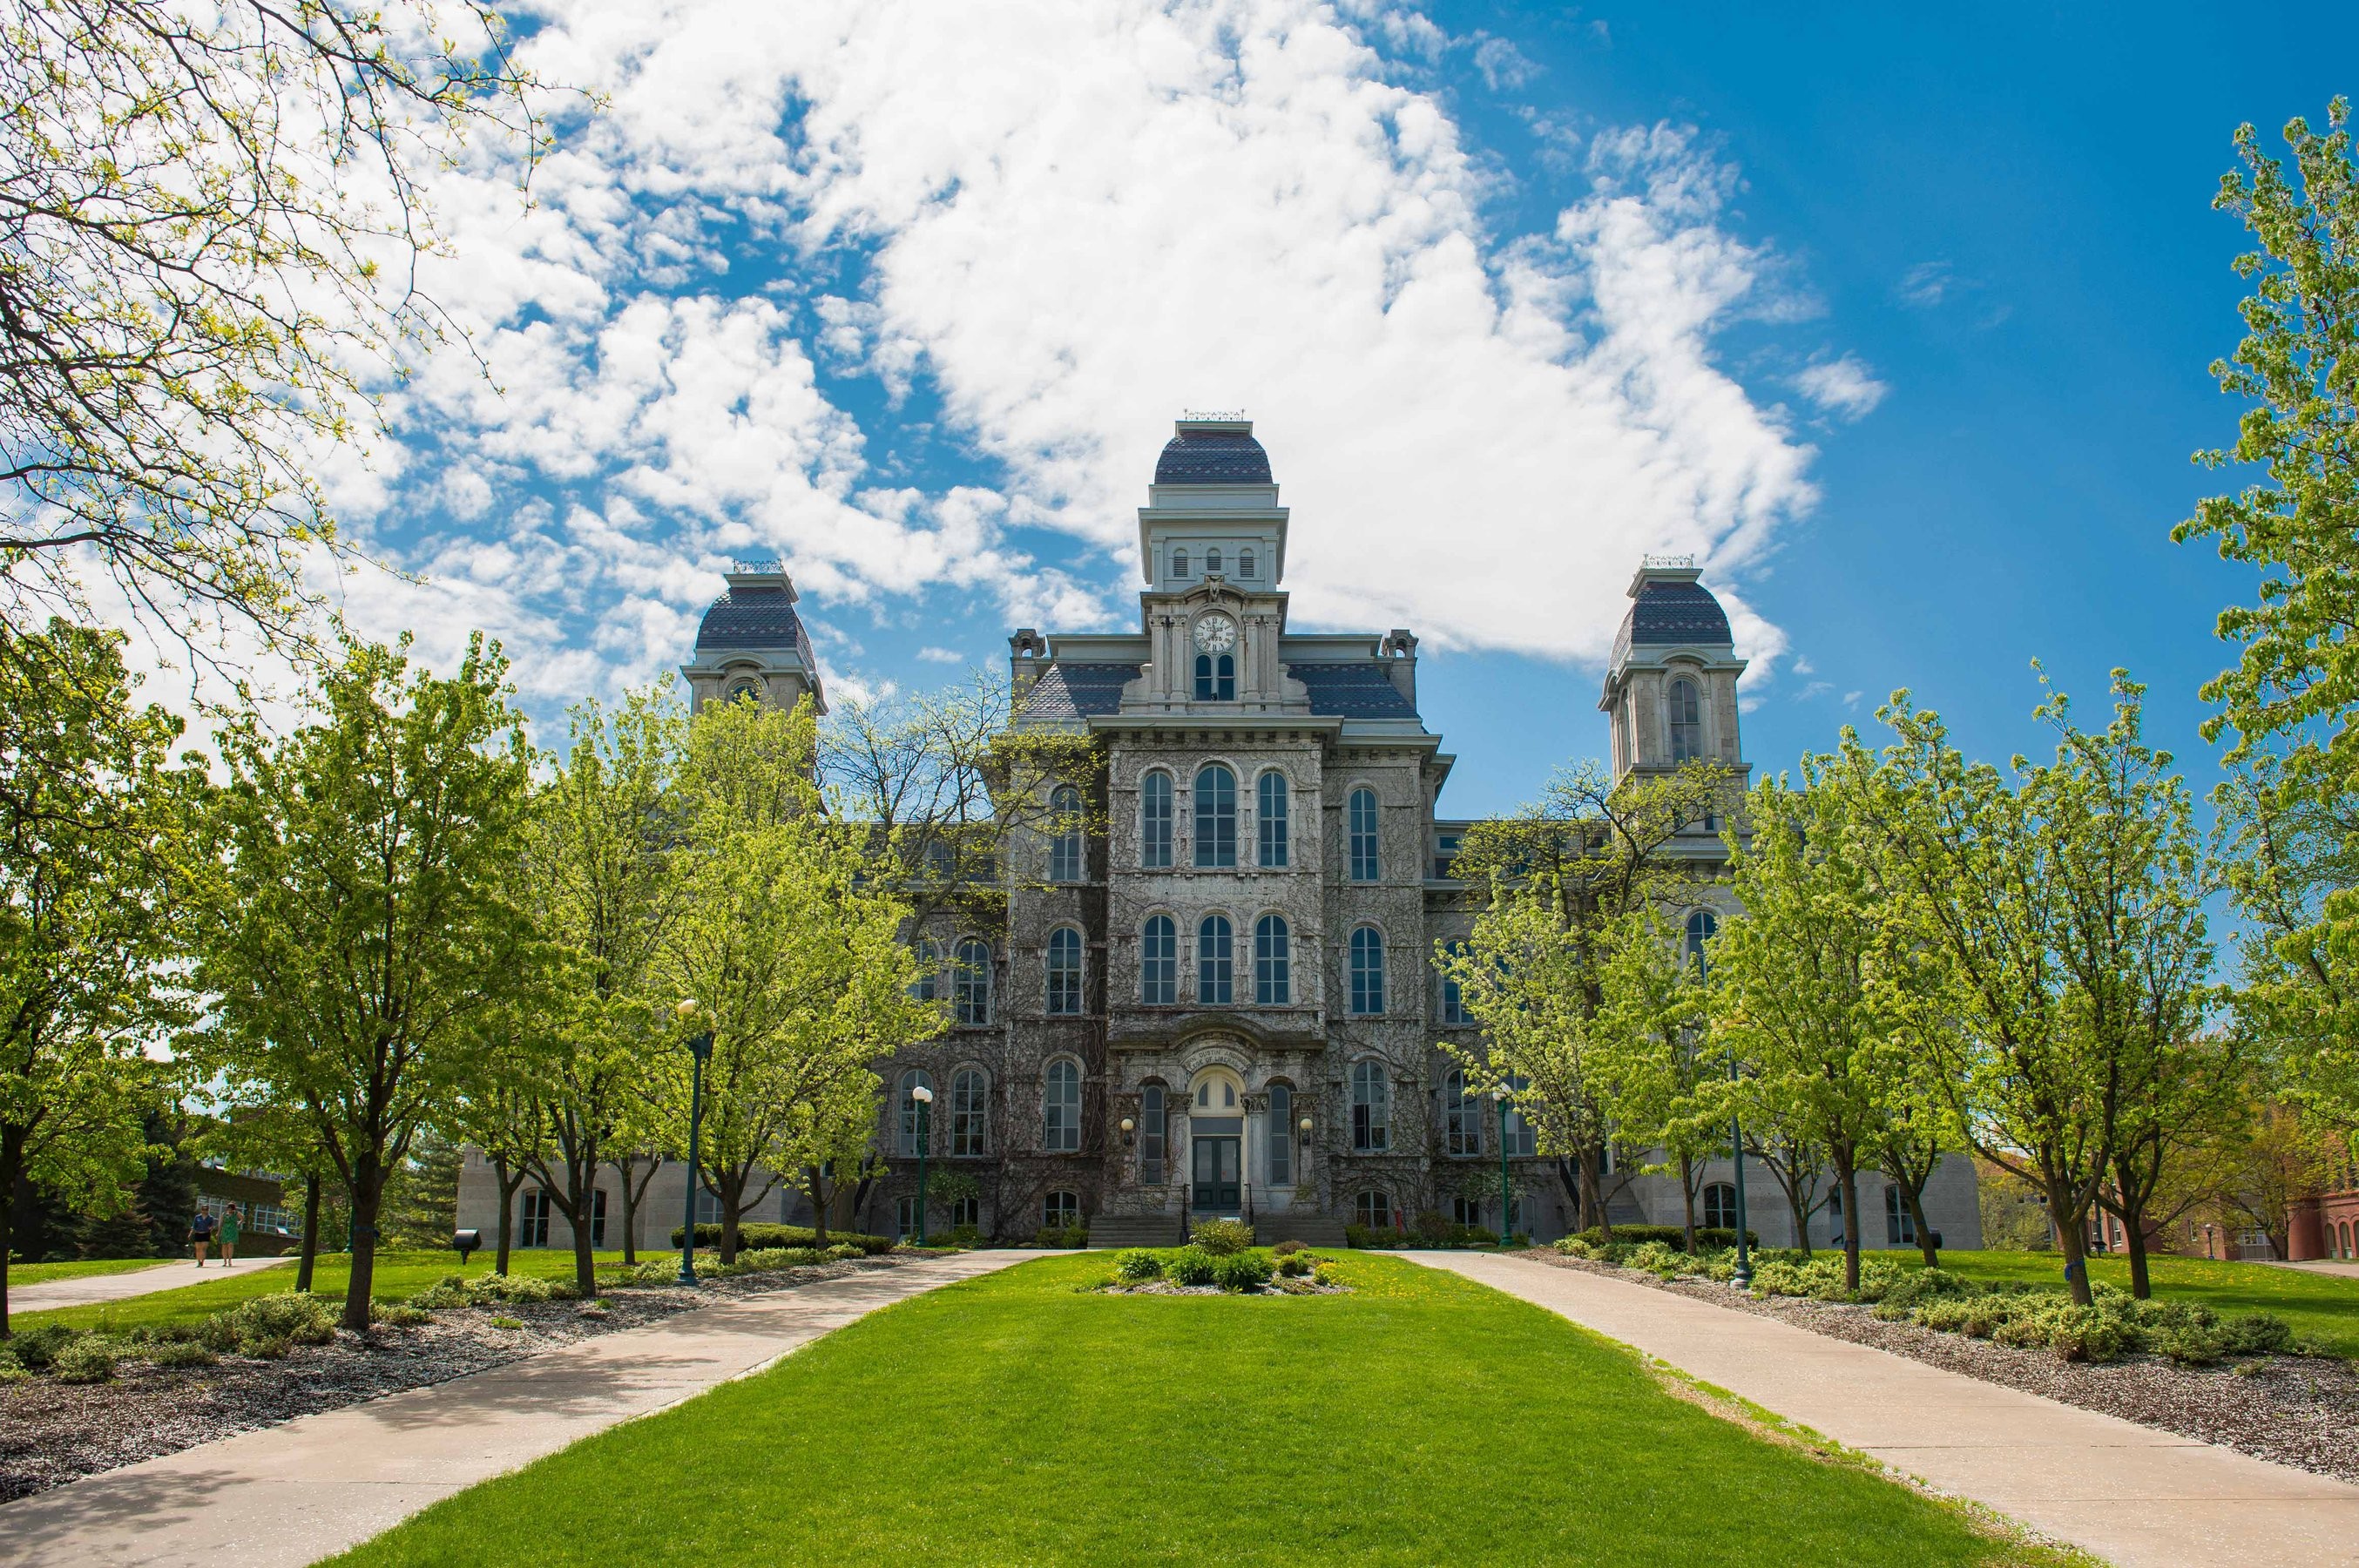 Hall of Languages building at Syracuse University with trees and grass lining the front entrance